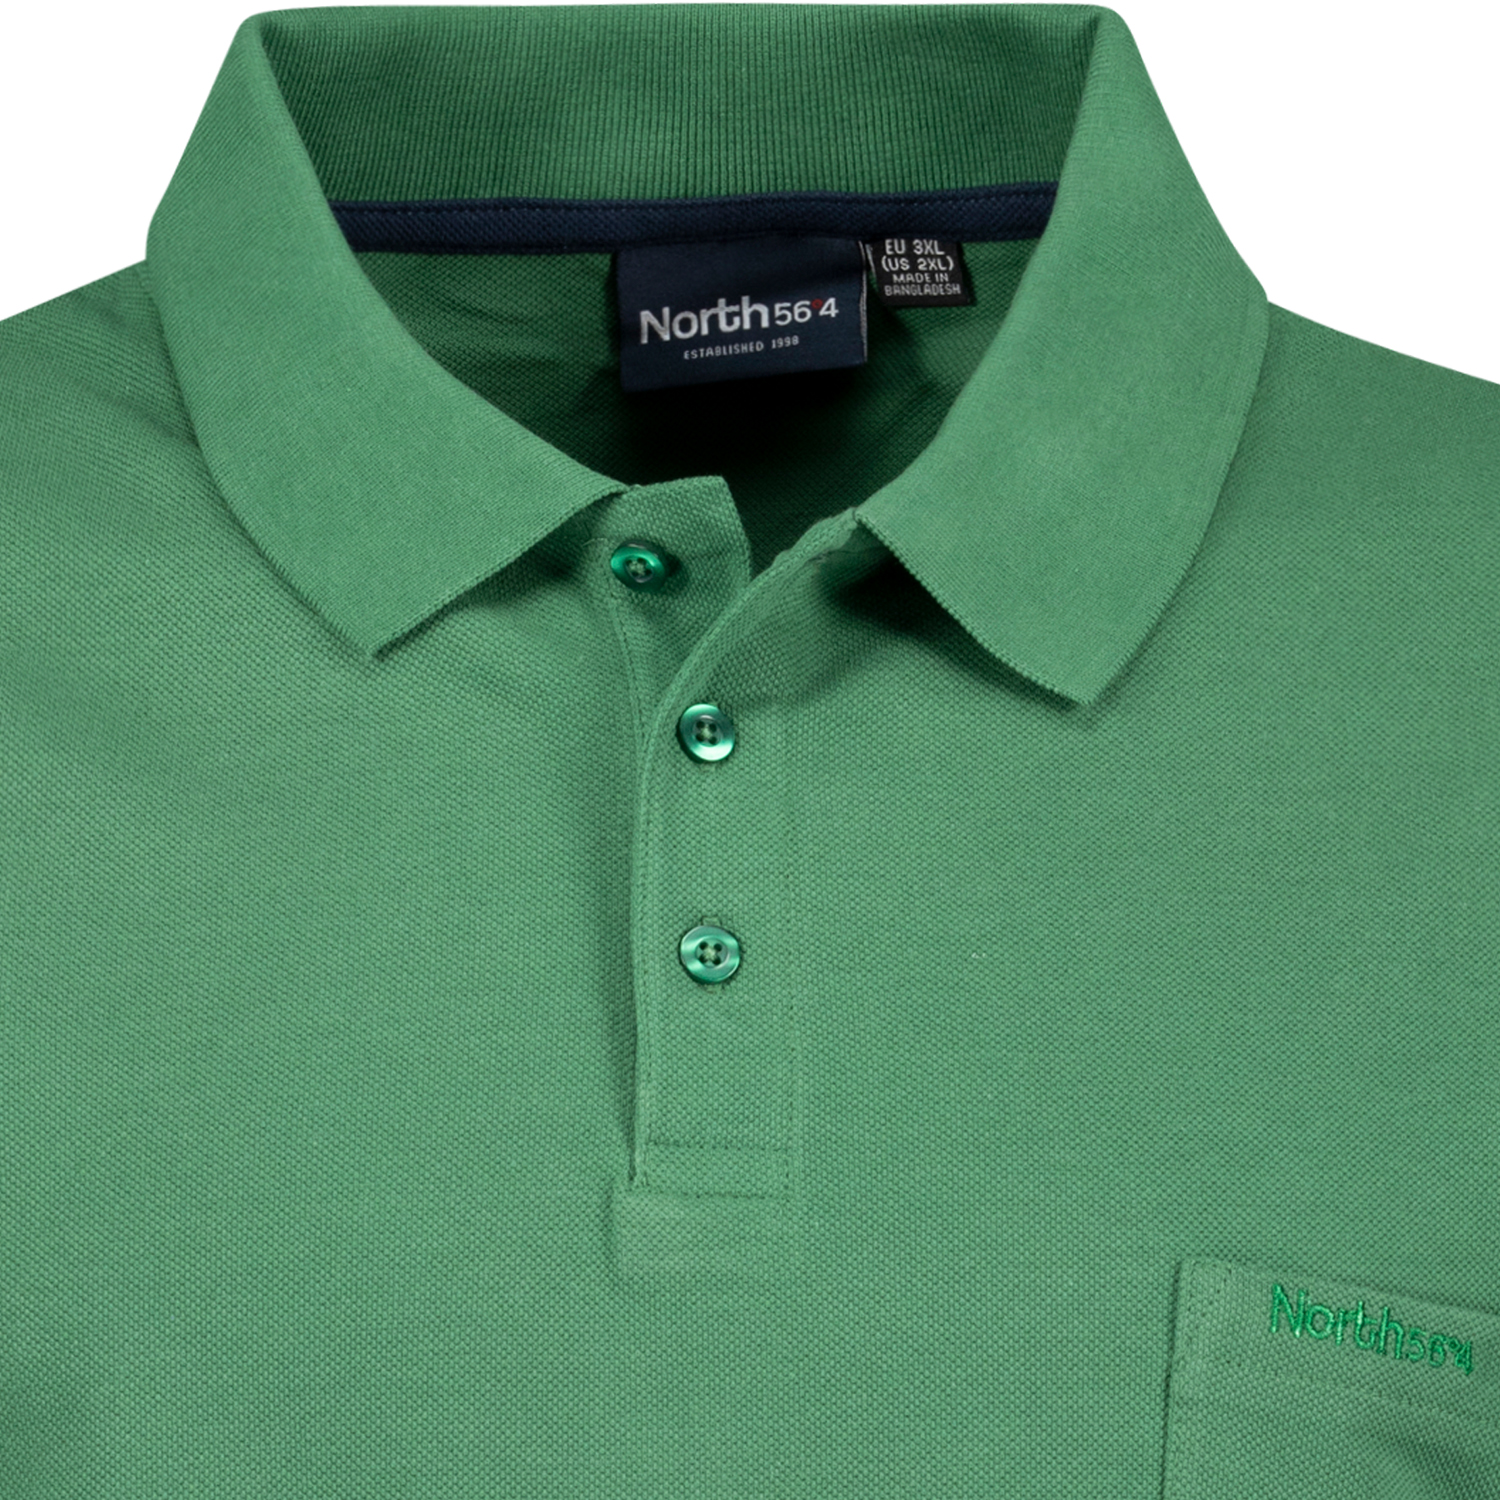 Green pique poloshirt for men by Greyes/North 56°4 in oversizes up to 8XL